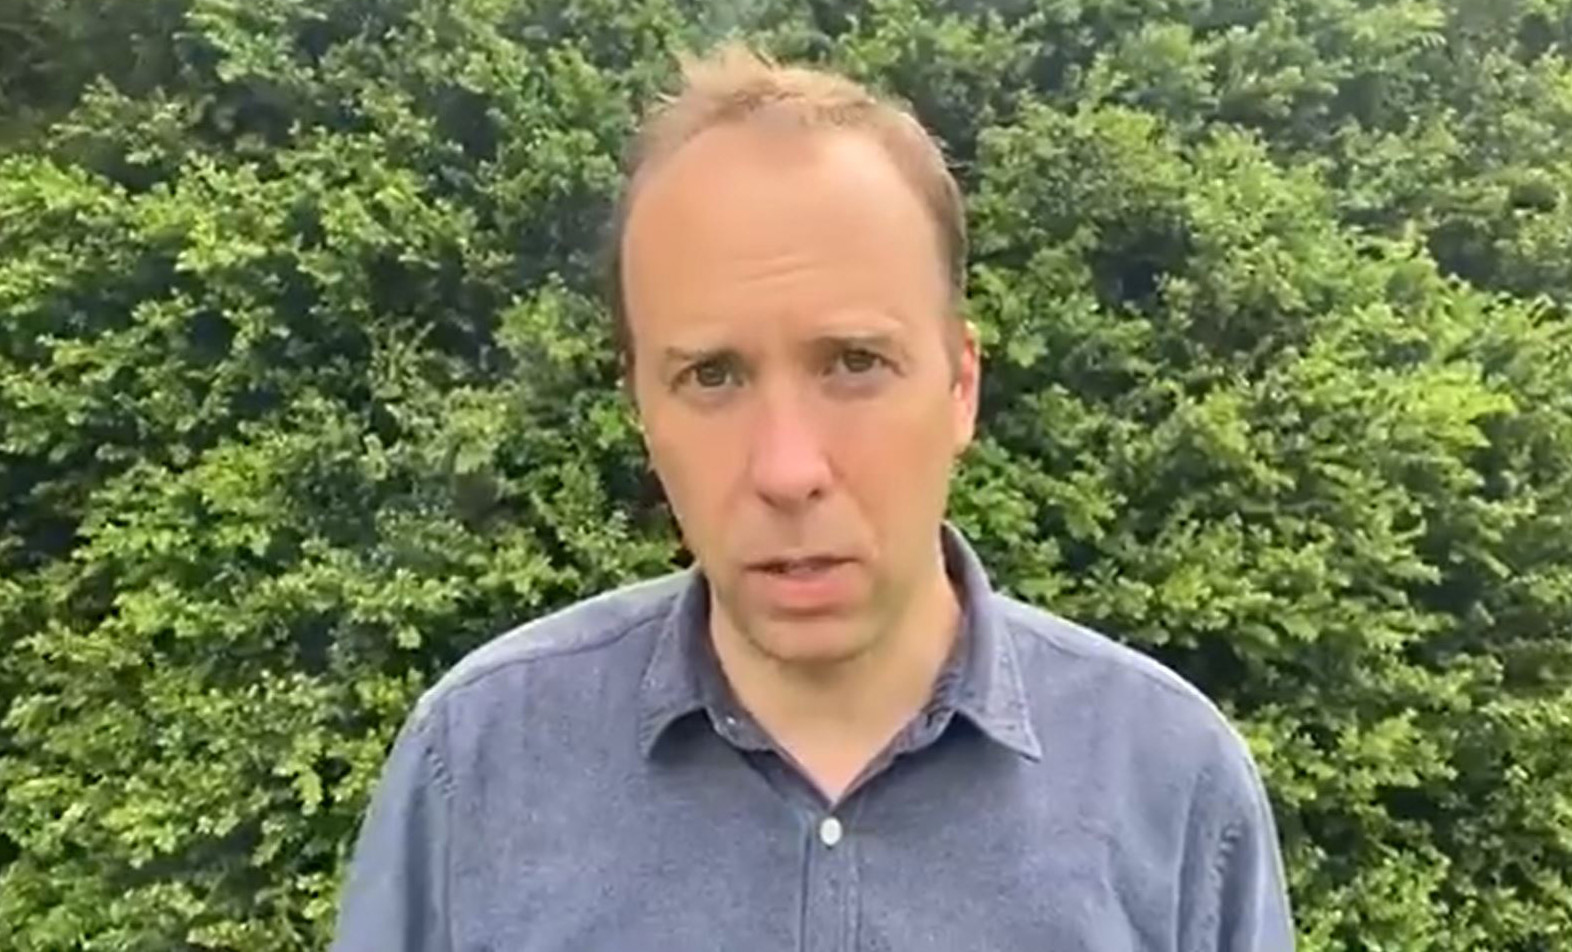 Screengrab taking from the video posted by Matt Hancock on his twitter feed where he resigned as Health Secretary on June 26, 2021 (Matt Hancock/PA Wire) 